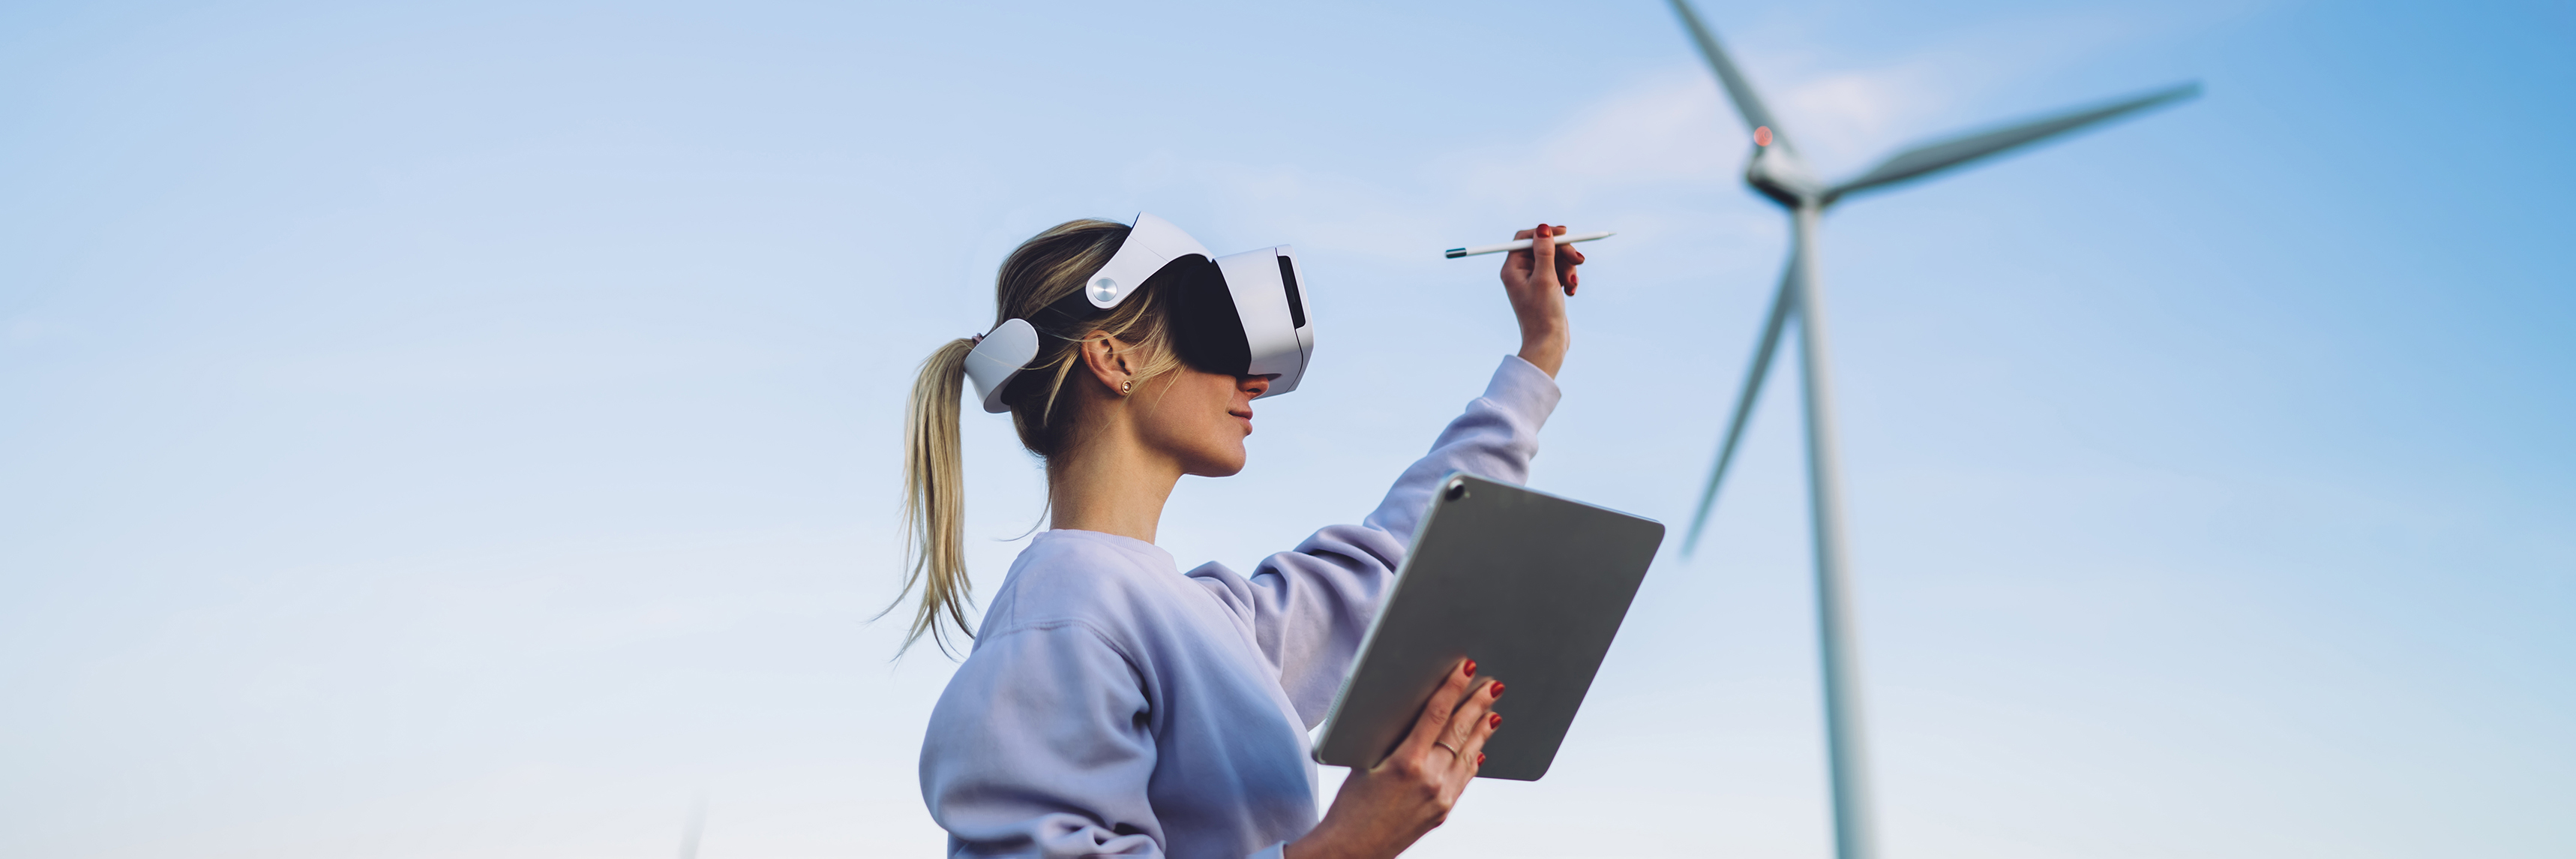 woman wearing vr headset with ipad in hand waving smart pen around